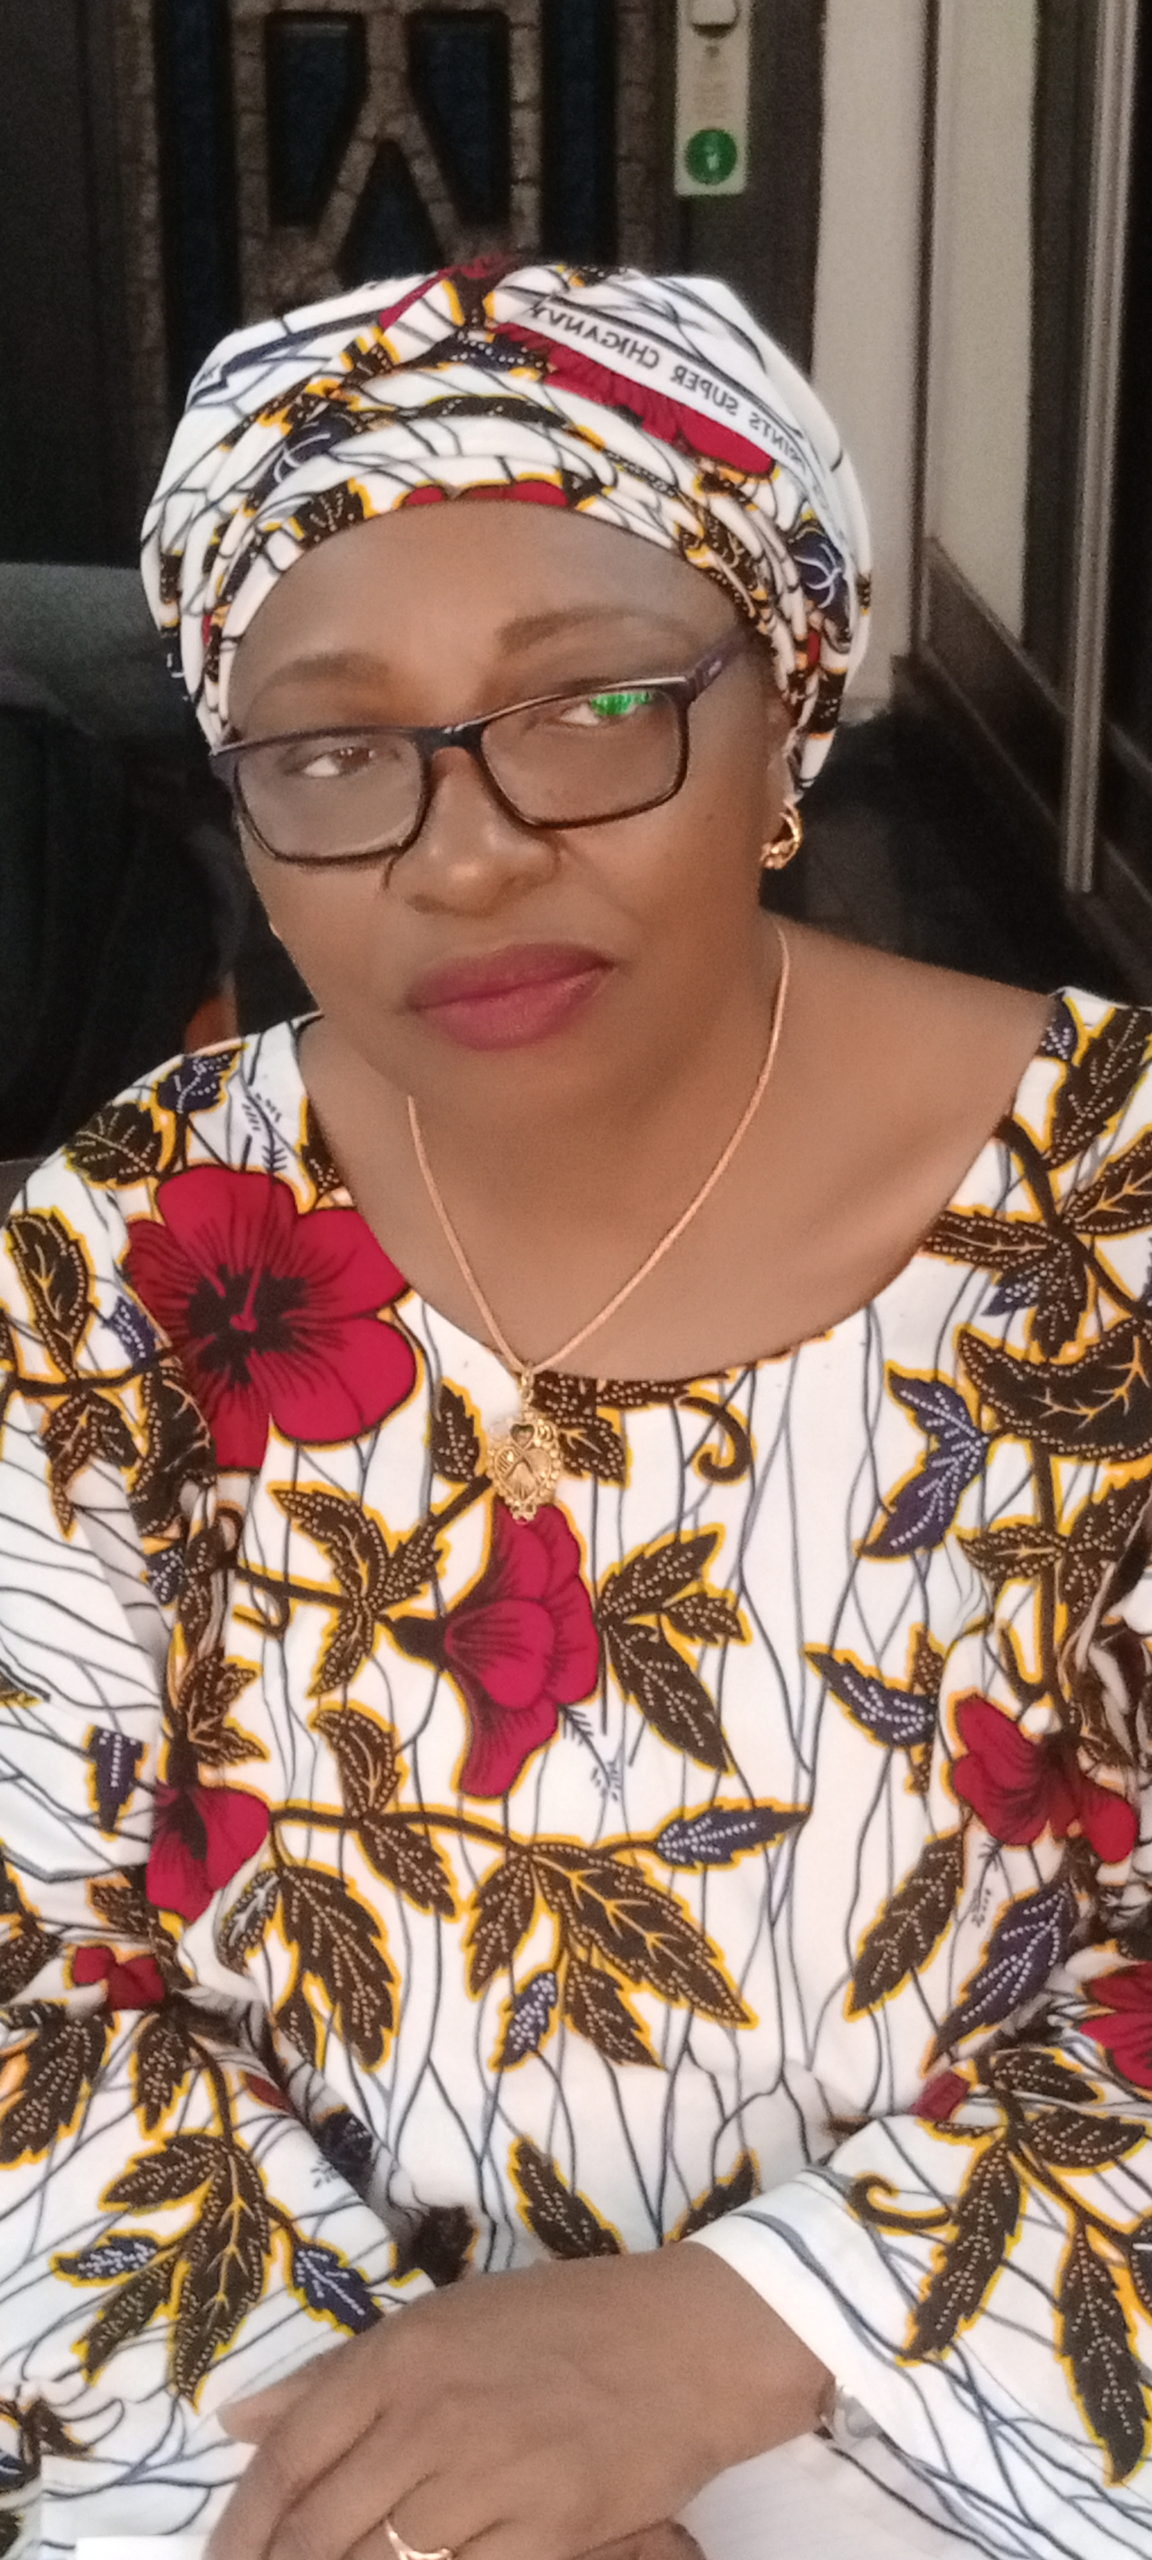 Interview…2023: Aken ’Ova, A Human Rights Activist, Says She is Not an Ordinary Person…Why She Wants to be Nigeria’s President